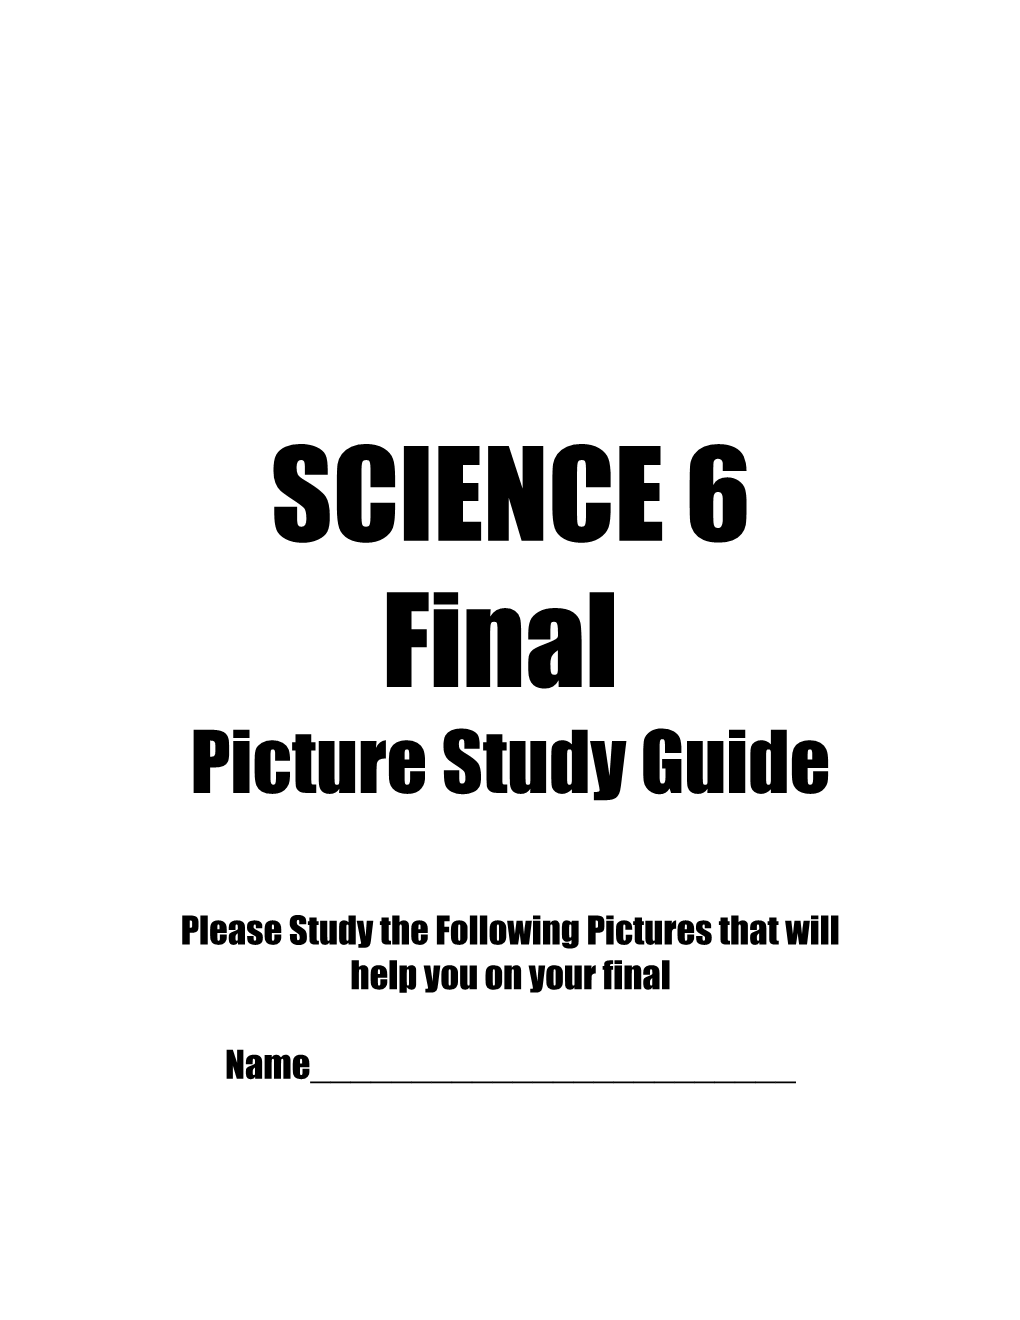 Please Study the Following Pictures That Will Help You on Your Final